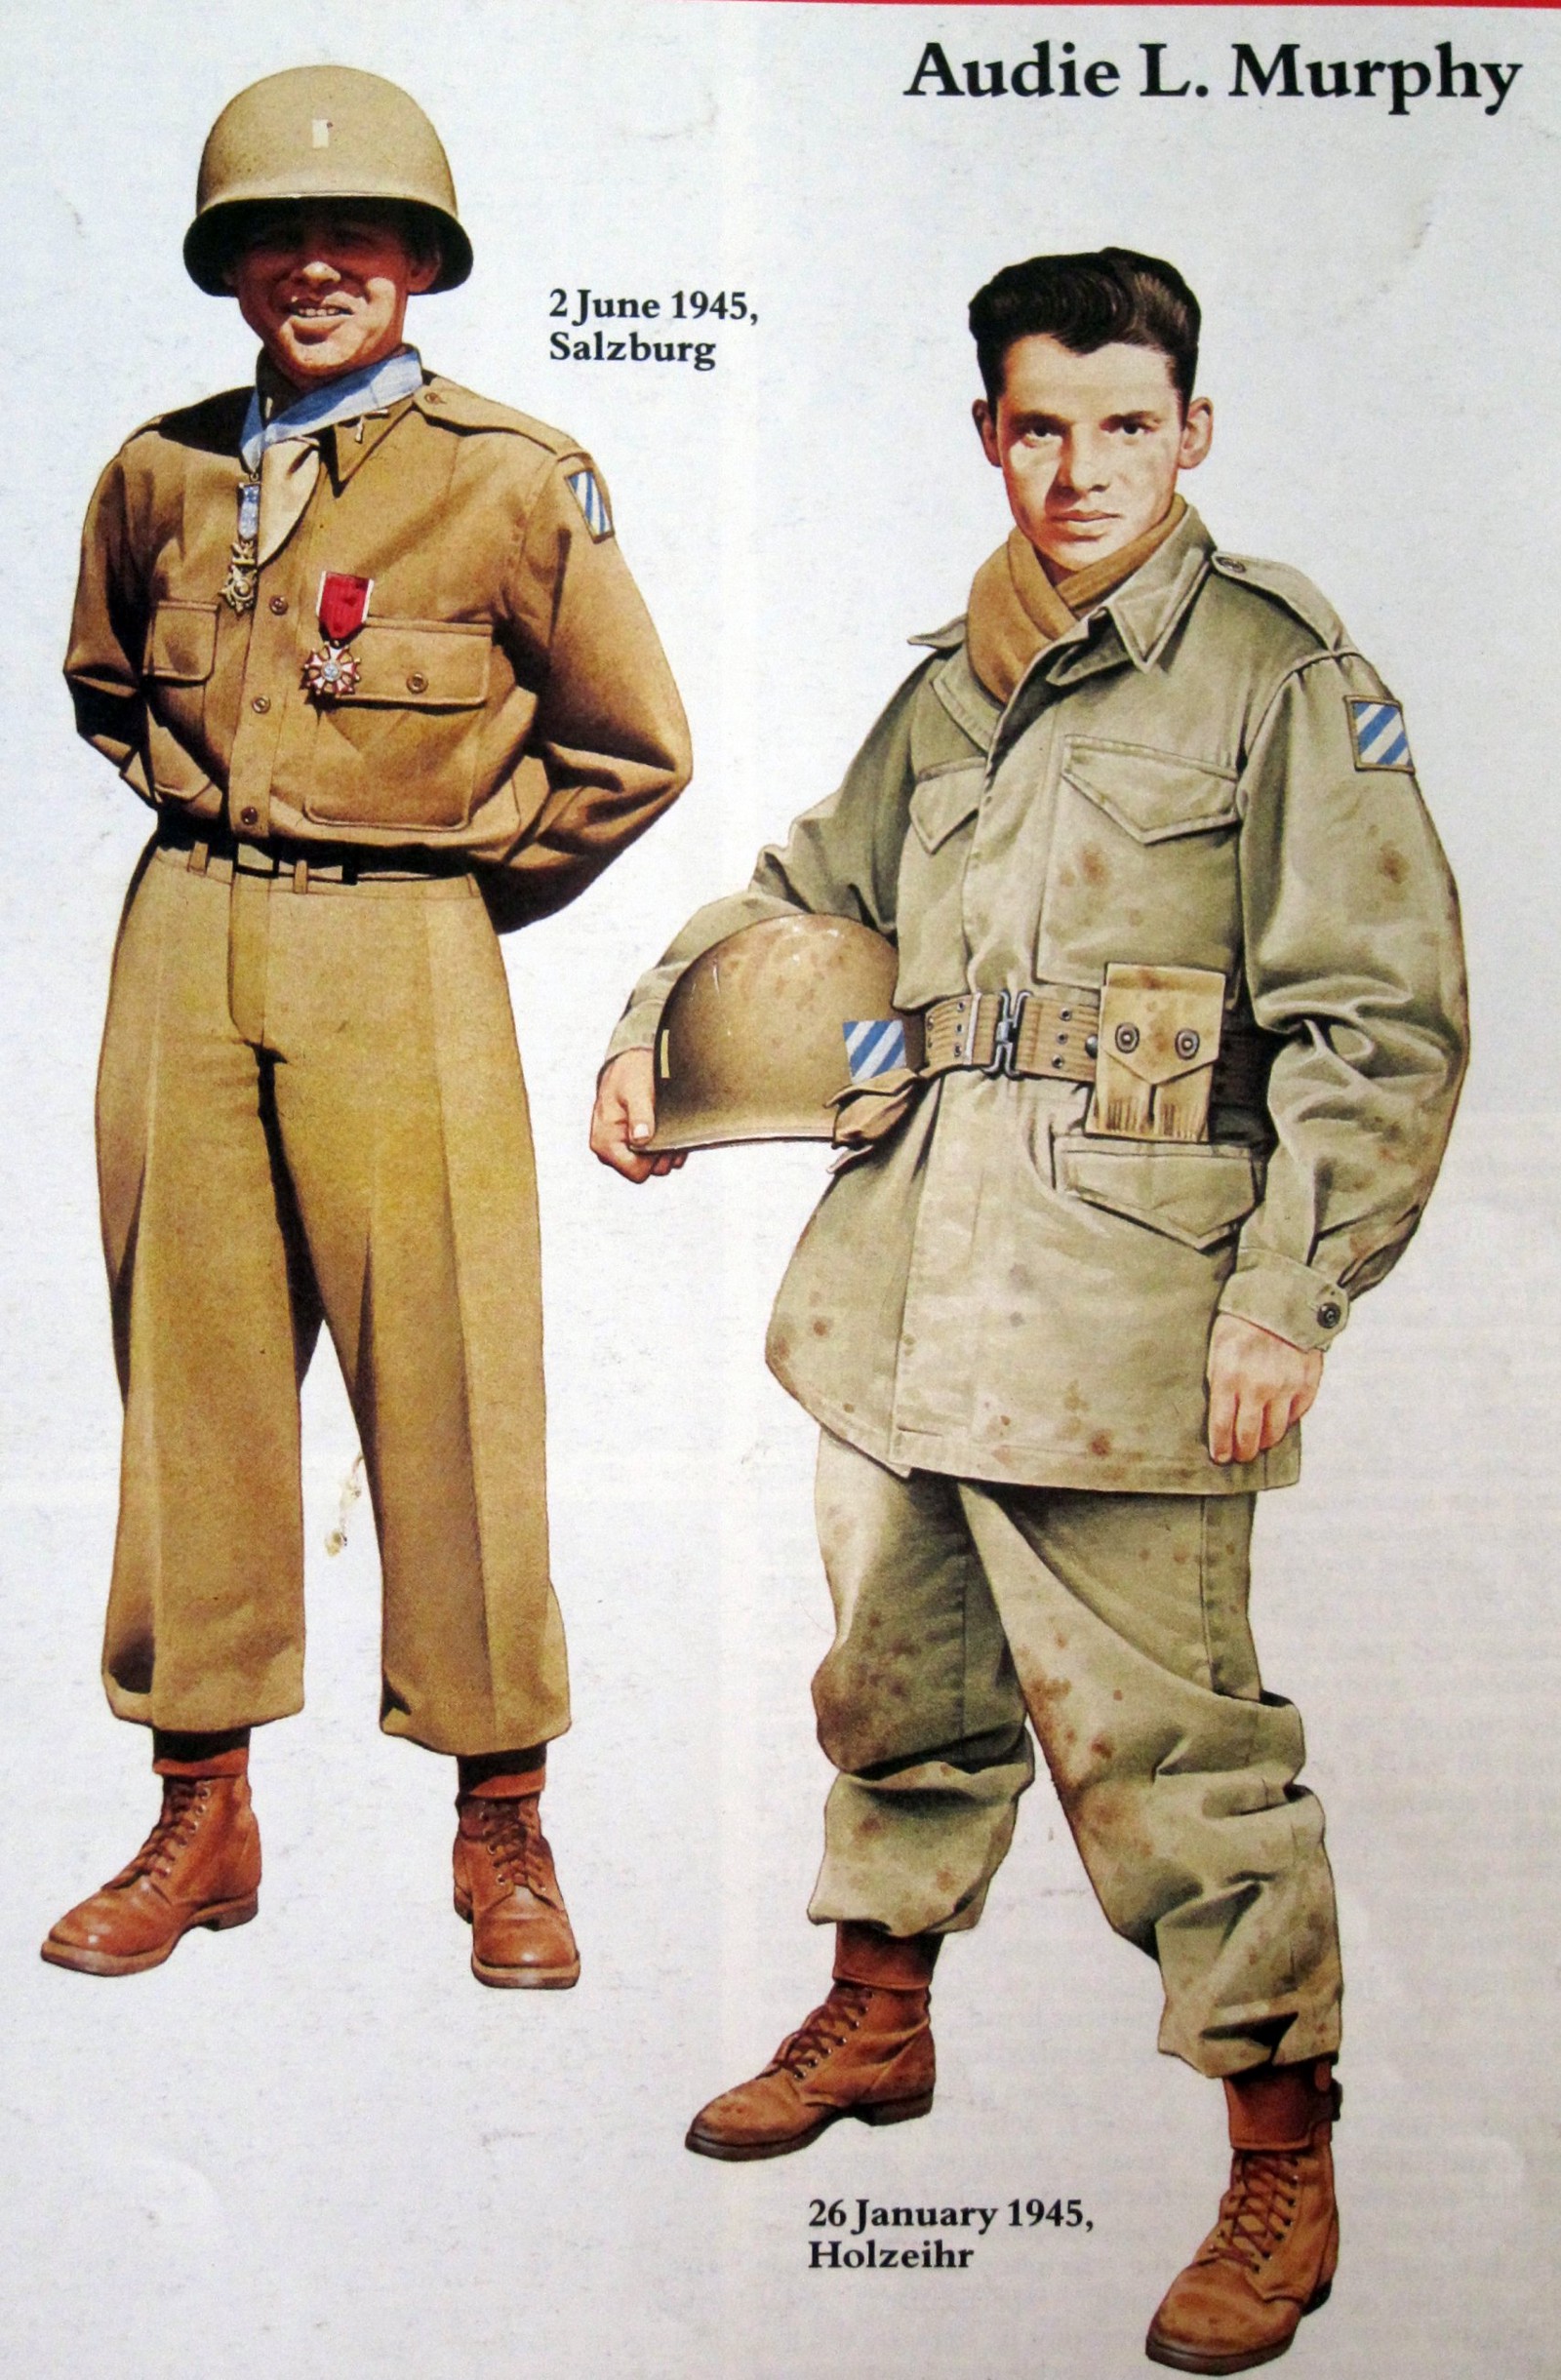 When a genuine American hero becomes a star — Audie Murphy's 'To ...